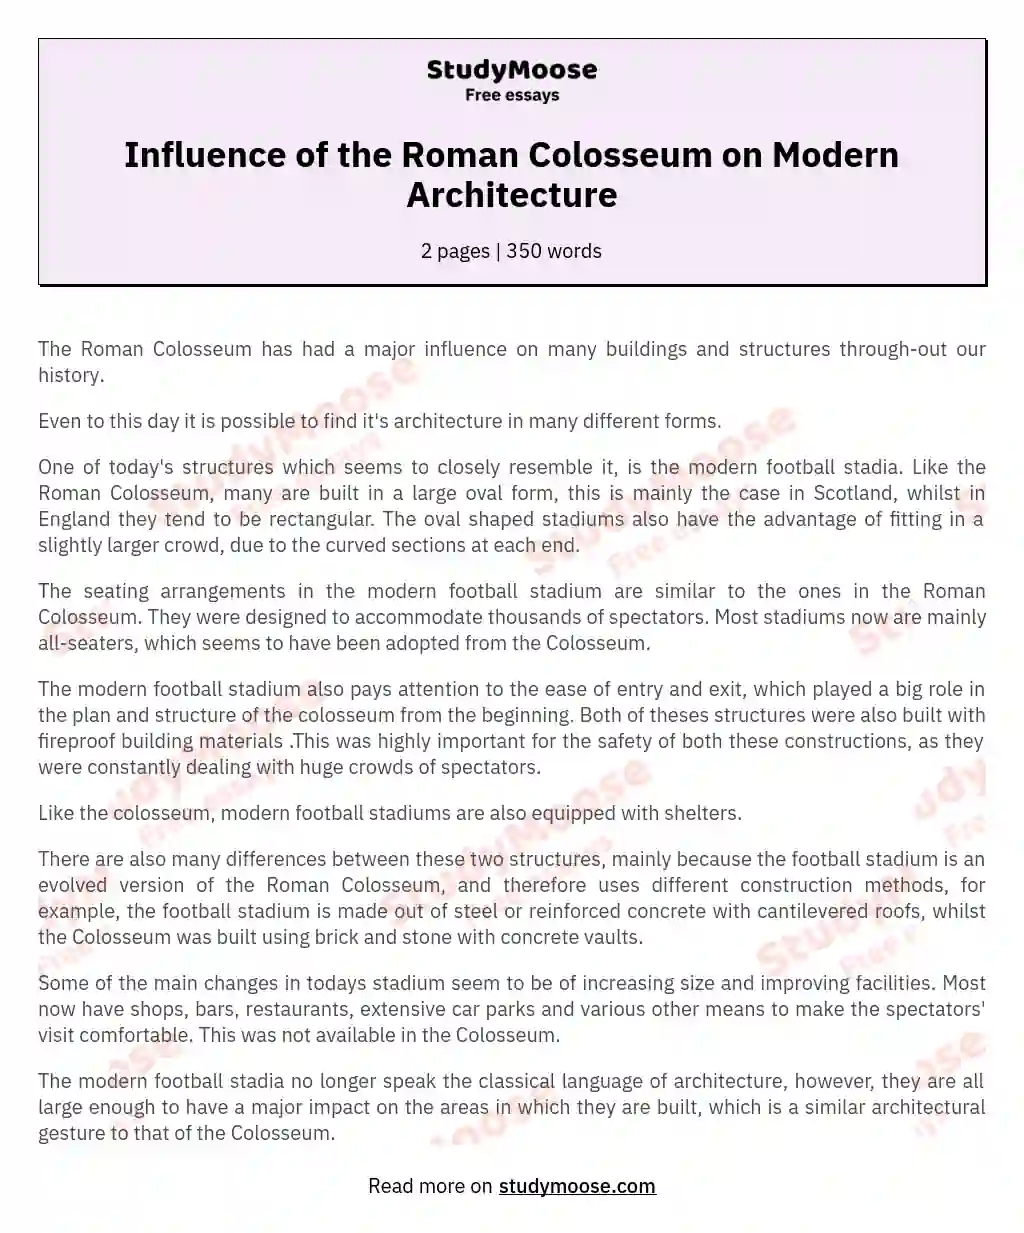 Influence of the Roman Colosseum on Modern Architecture essay